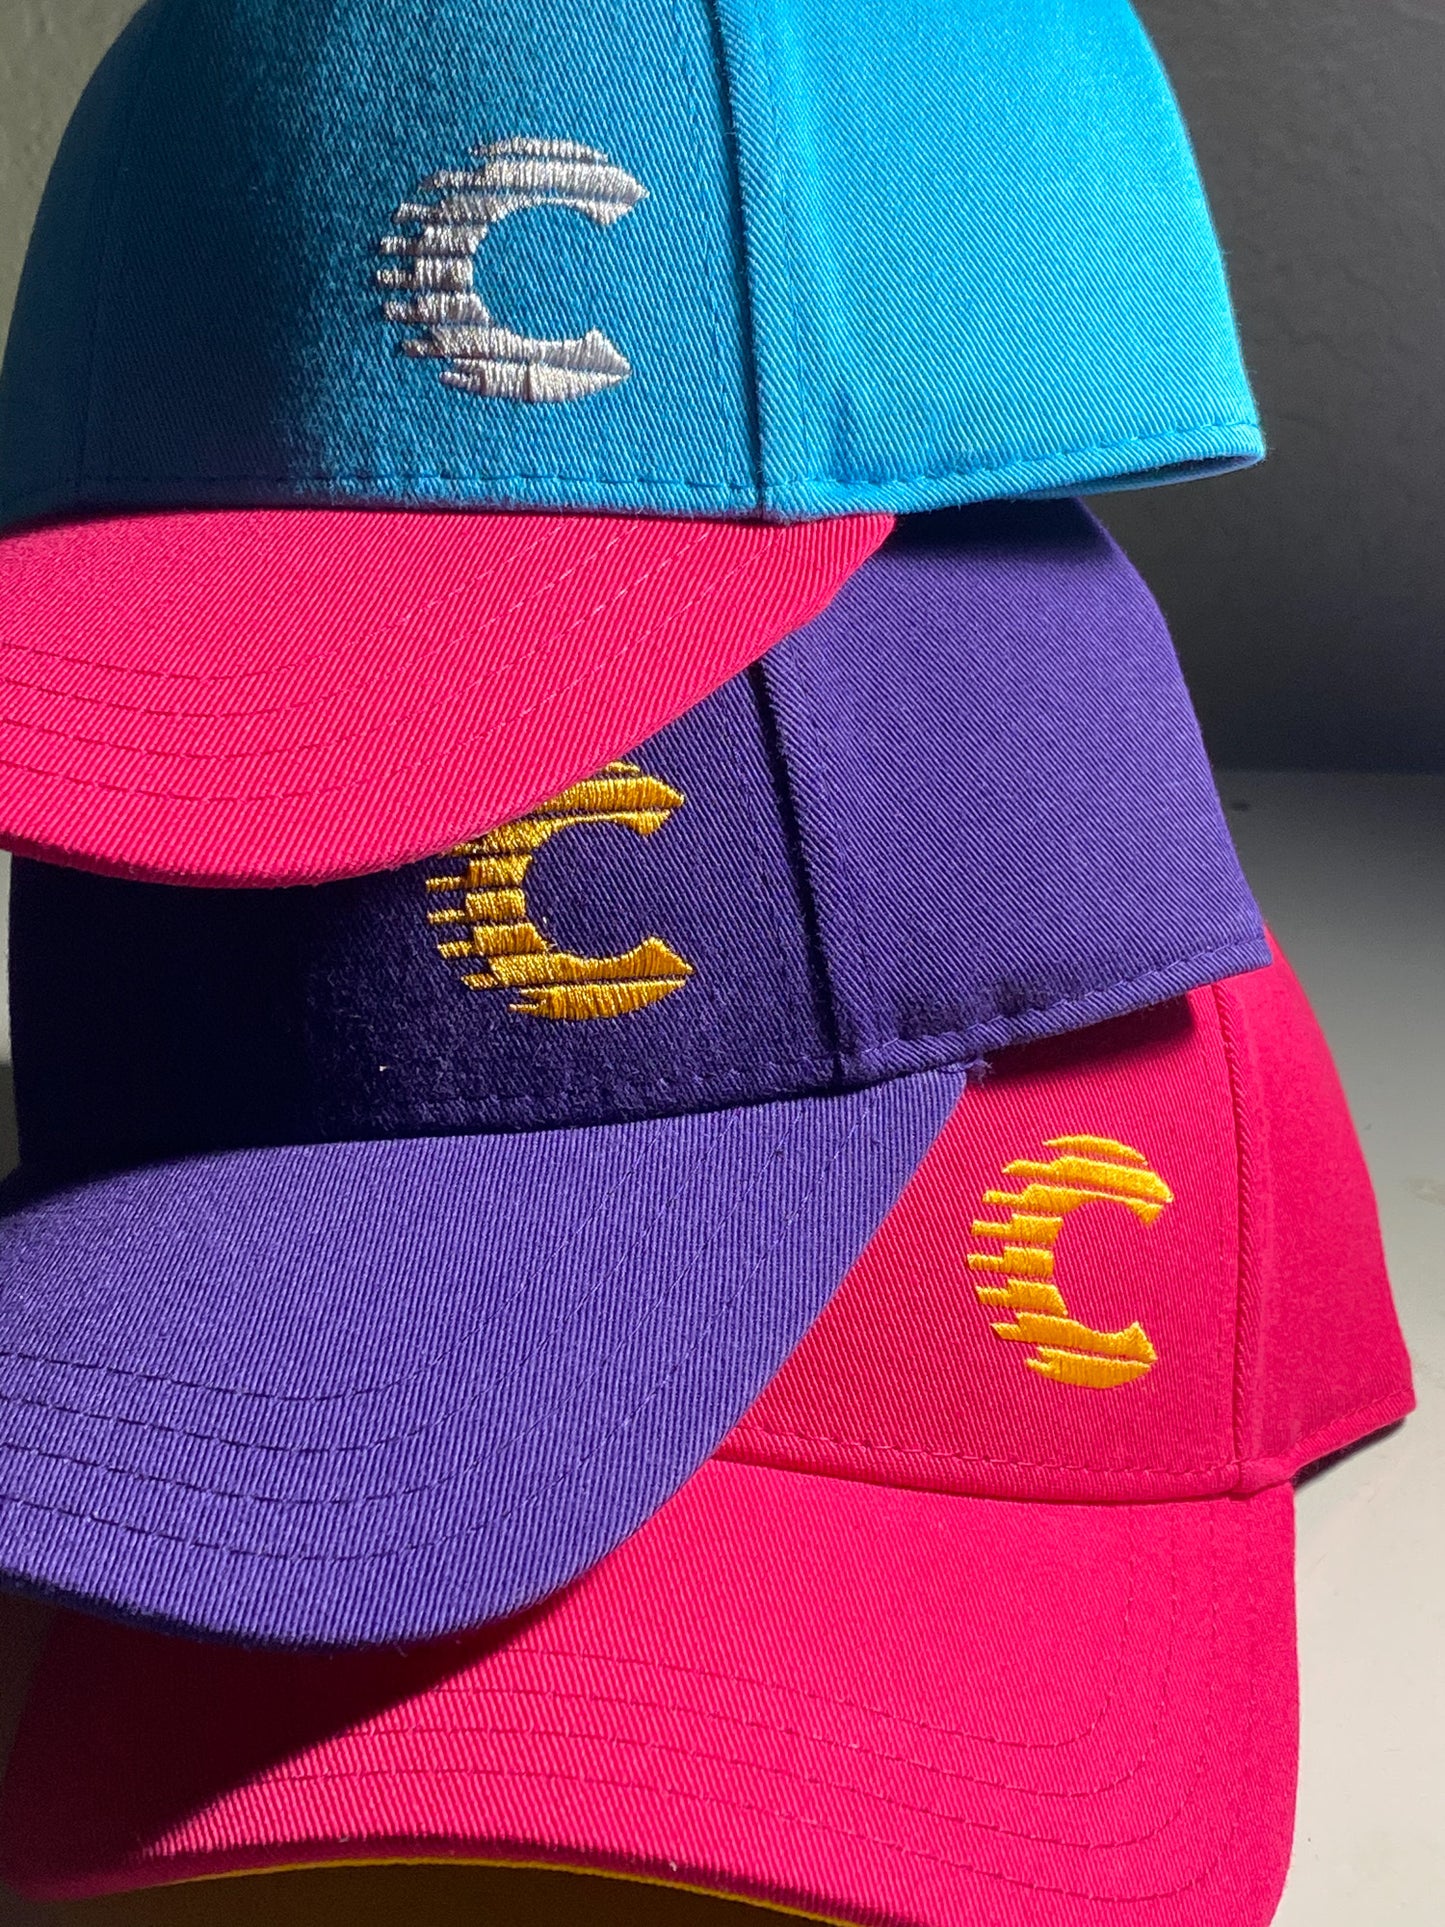 Cooled Collective Caps